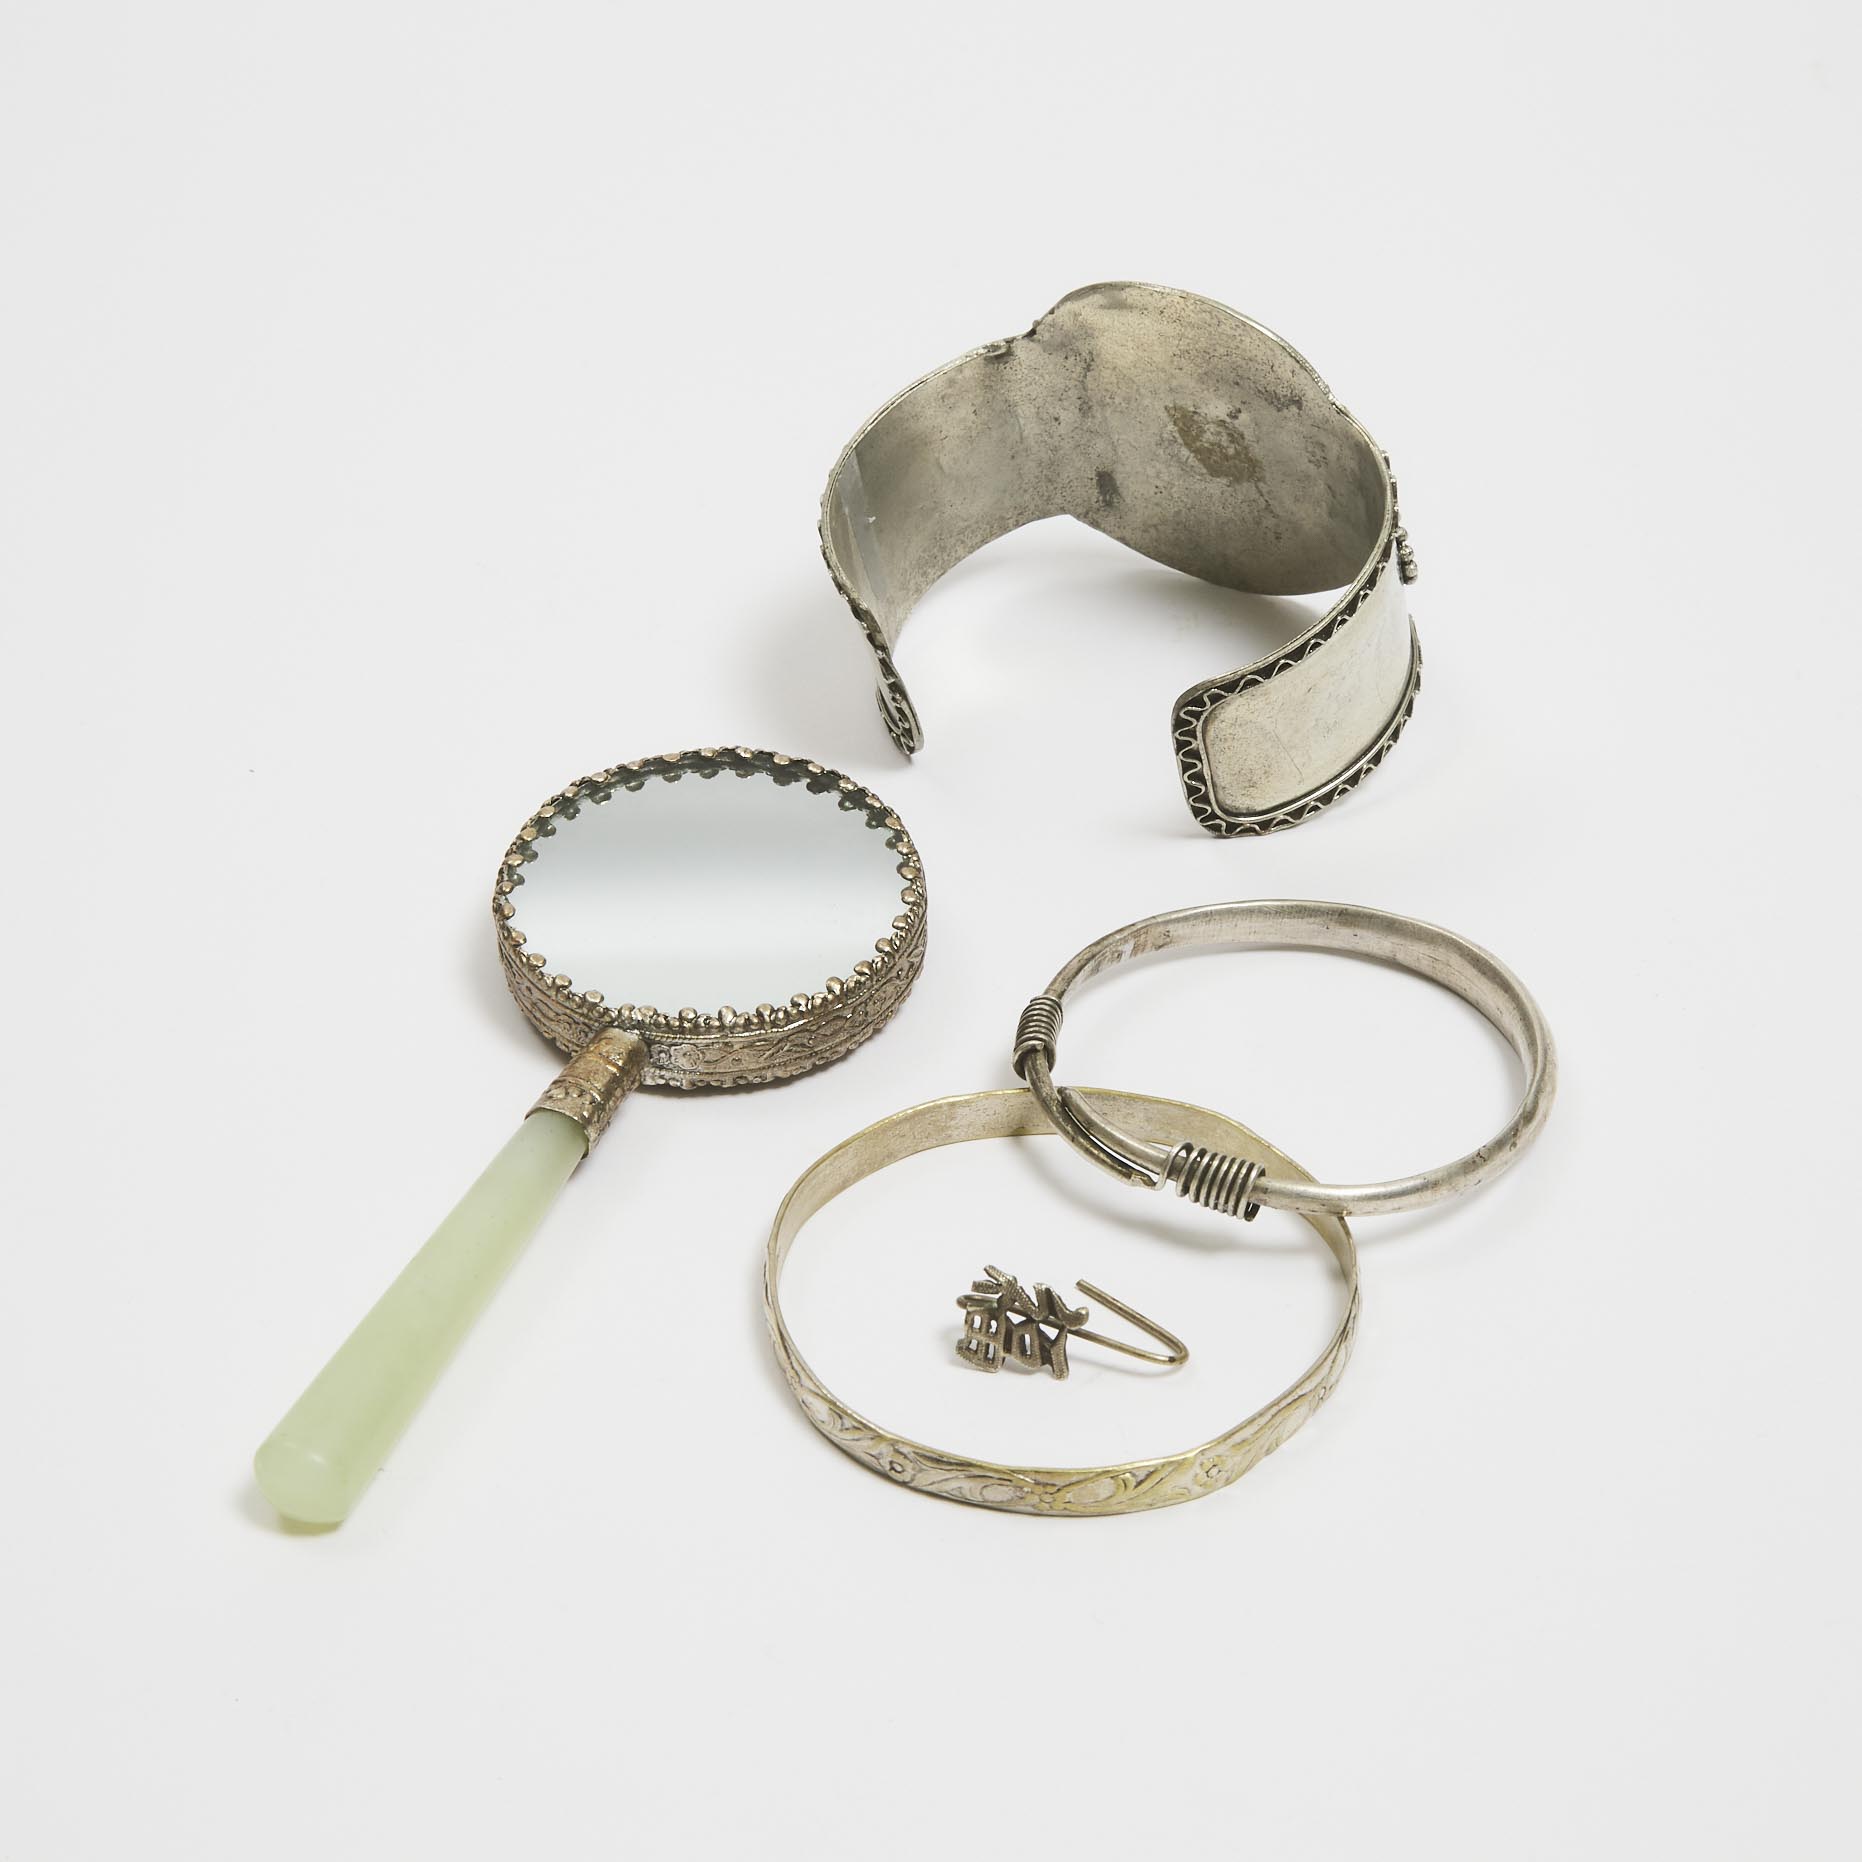 A Group of Agate, Jade and Silver Jewellery, Late Qing/Republican Period